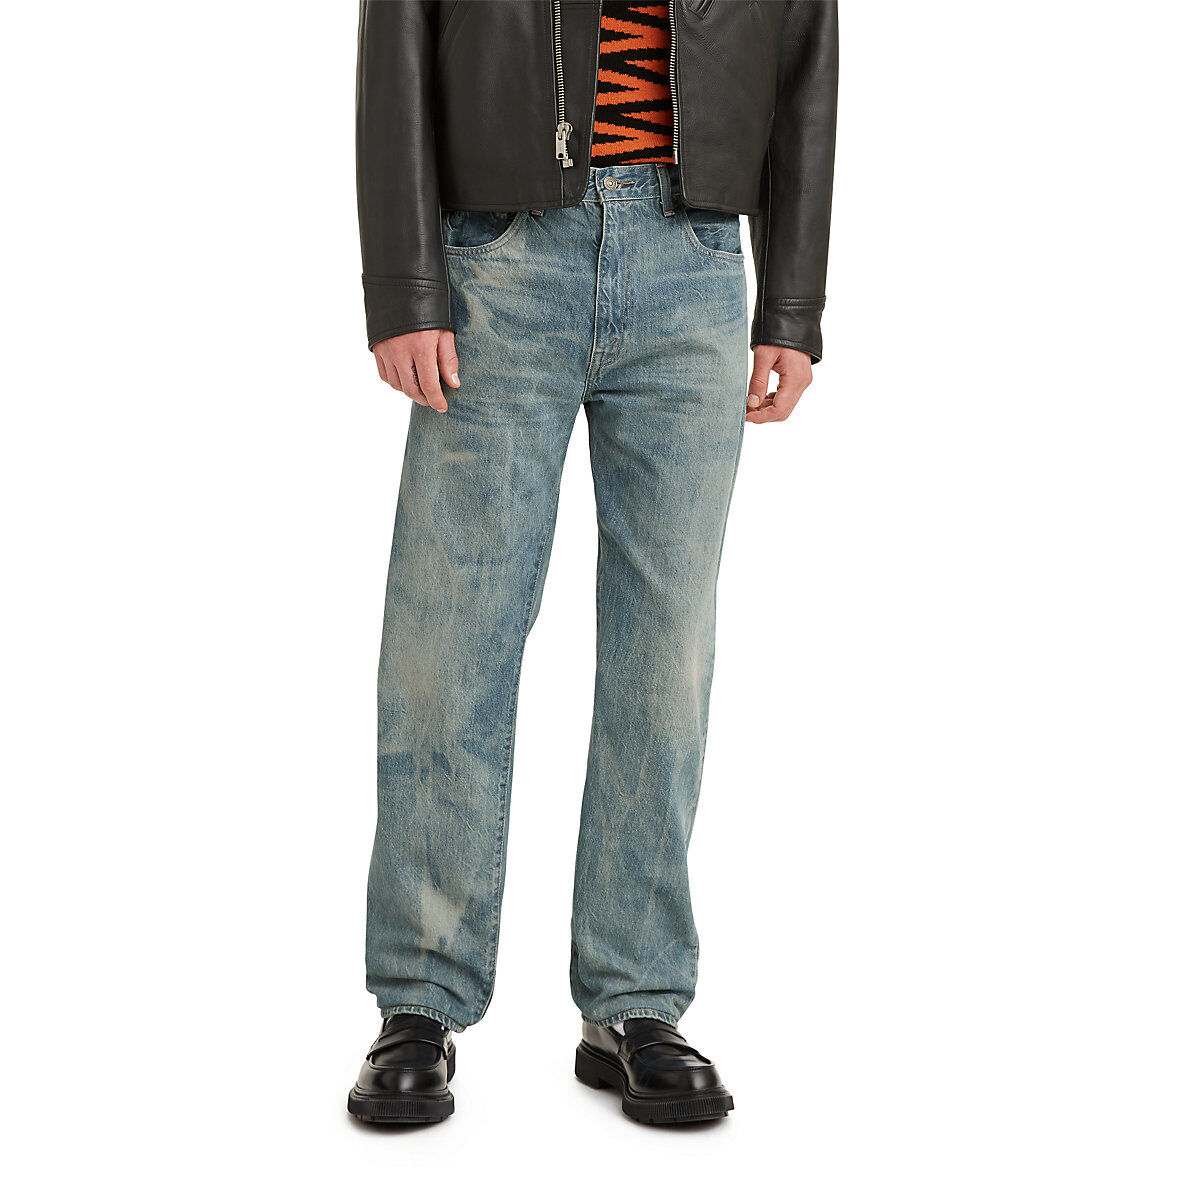 LIMITED EDITIONLEVI'S® VINTAGE CLOTHING 1960モデル 501Z THE RUMBLE 